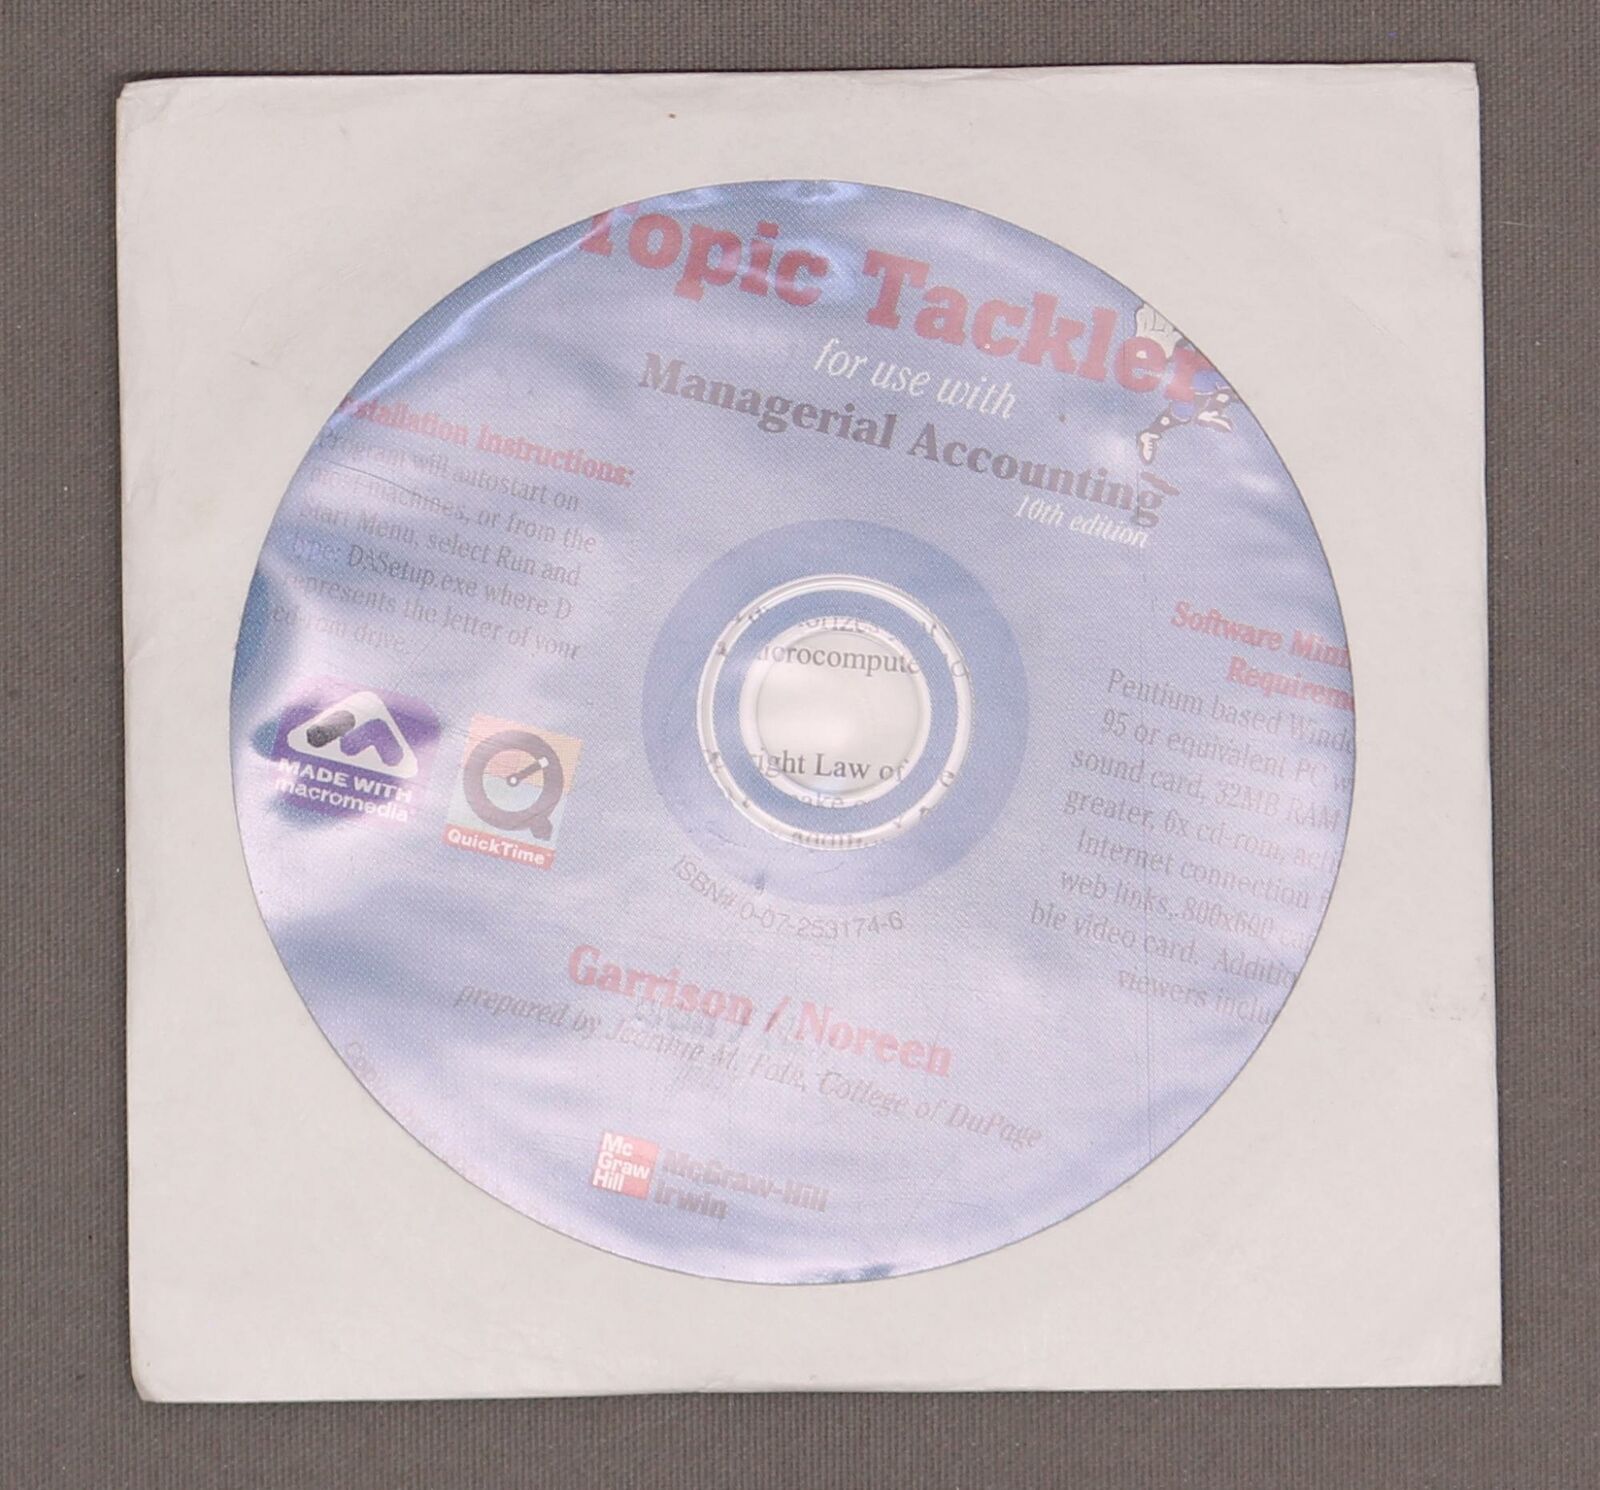 topic Tackler for use with Managerial Accounting - 10th Edition (2002,CD-ROM)